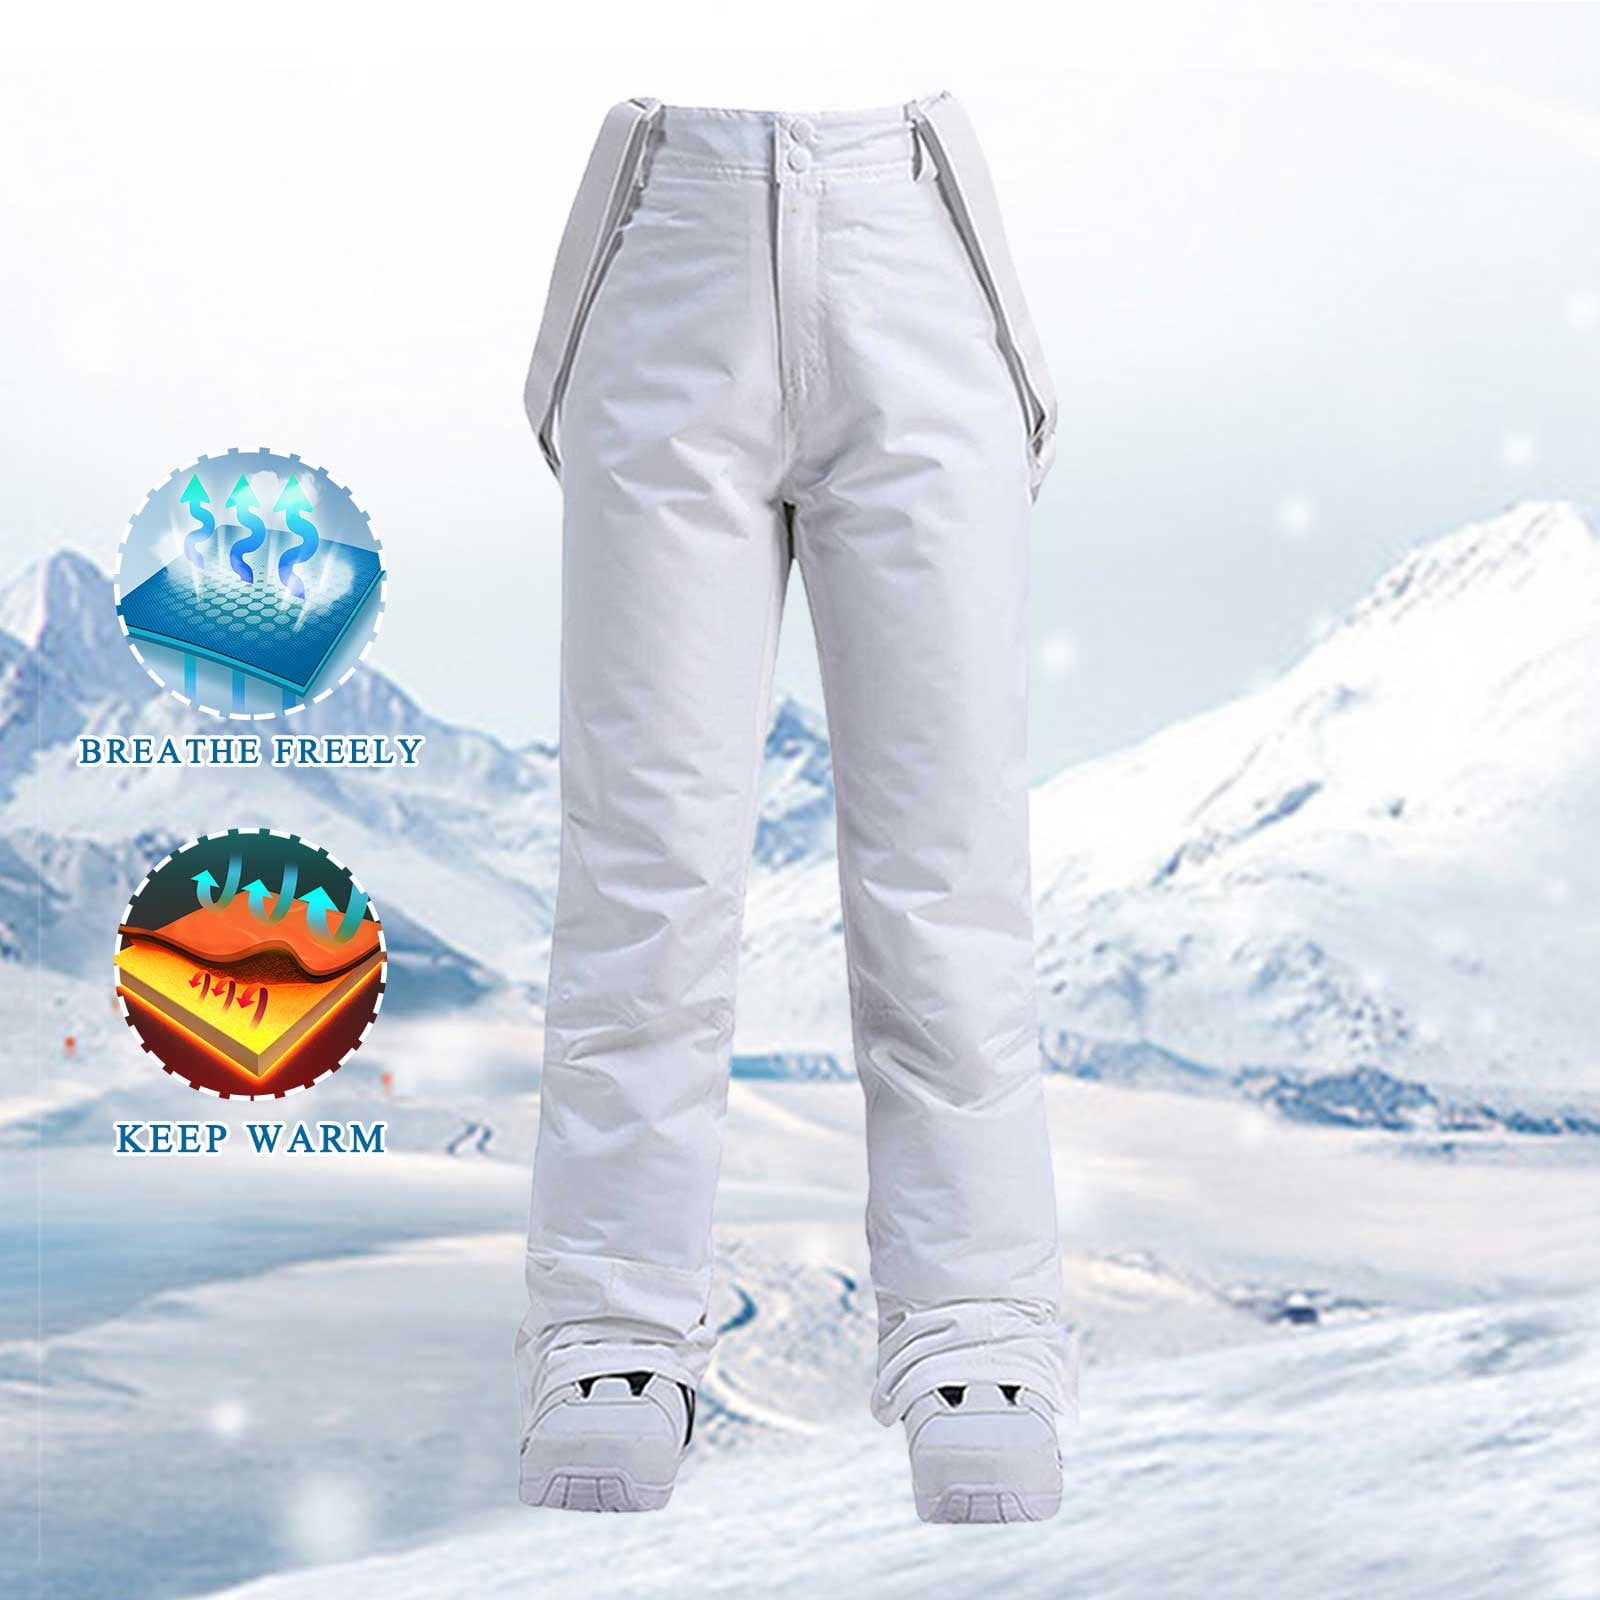 white ski jacket and pants - OFF-55% >Free Delivery